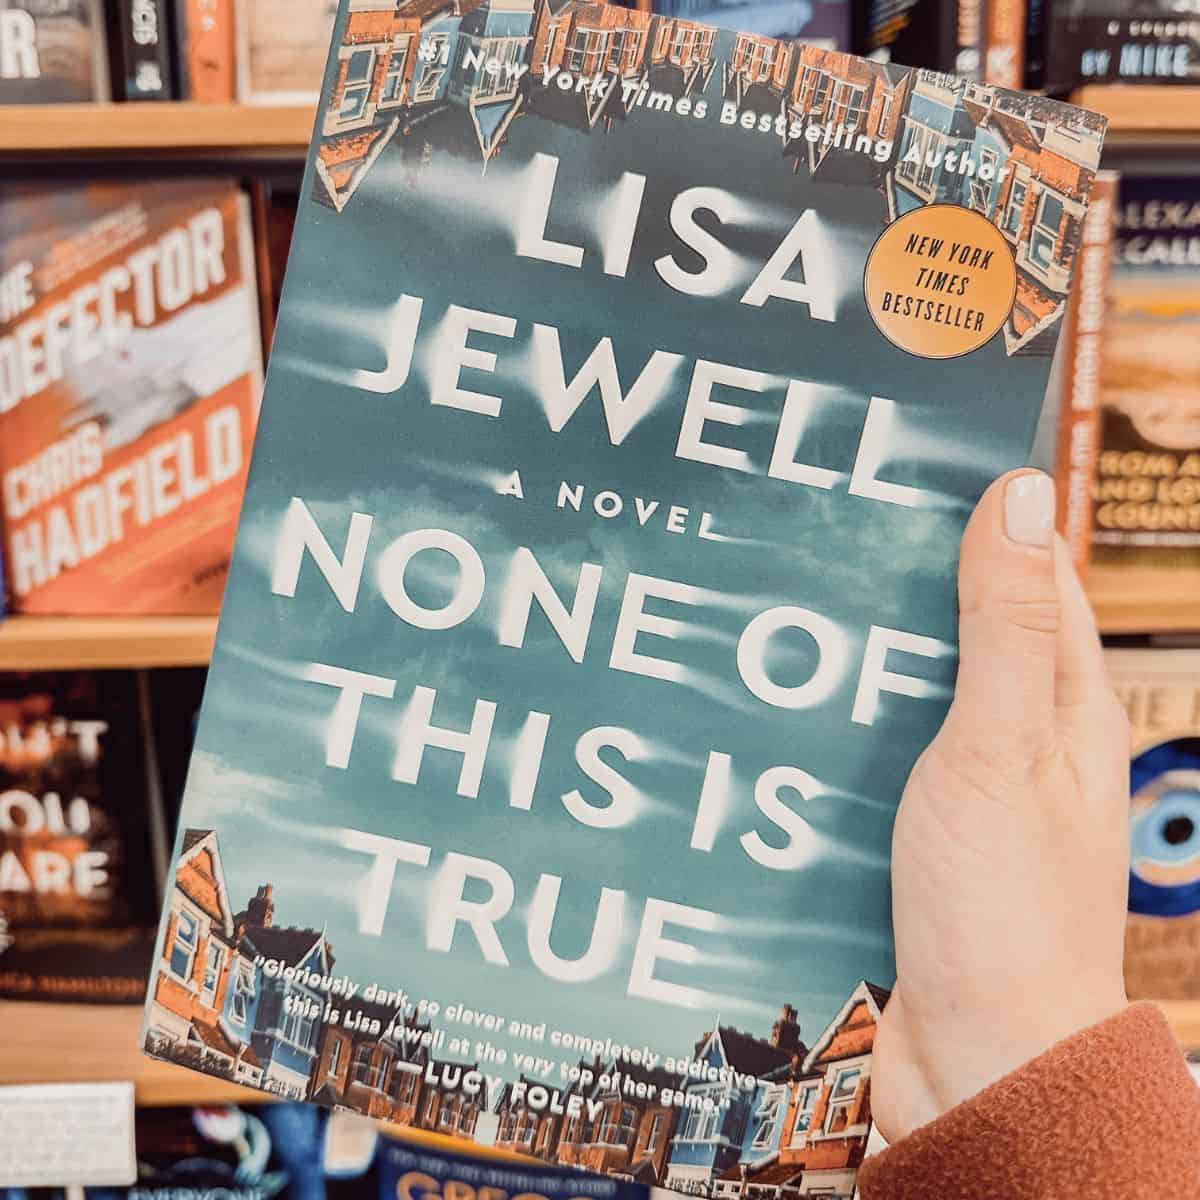 None of this is true by Lisa Jewell held in front of a bookshelf.